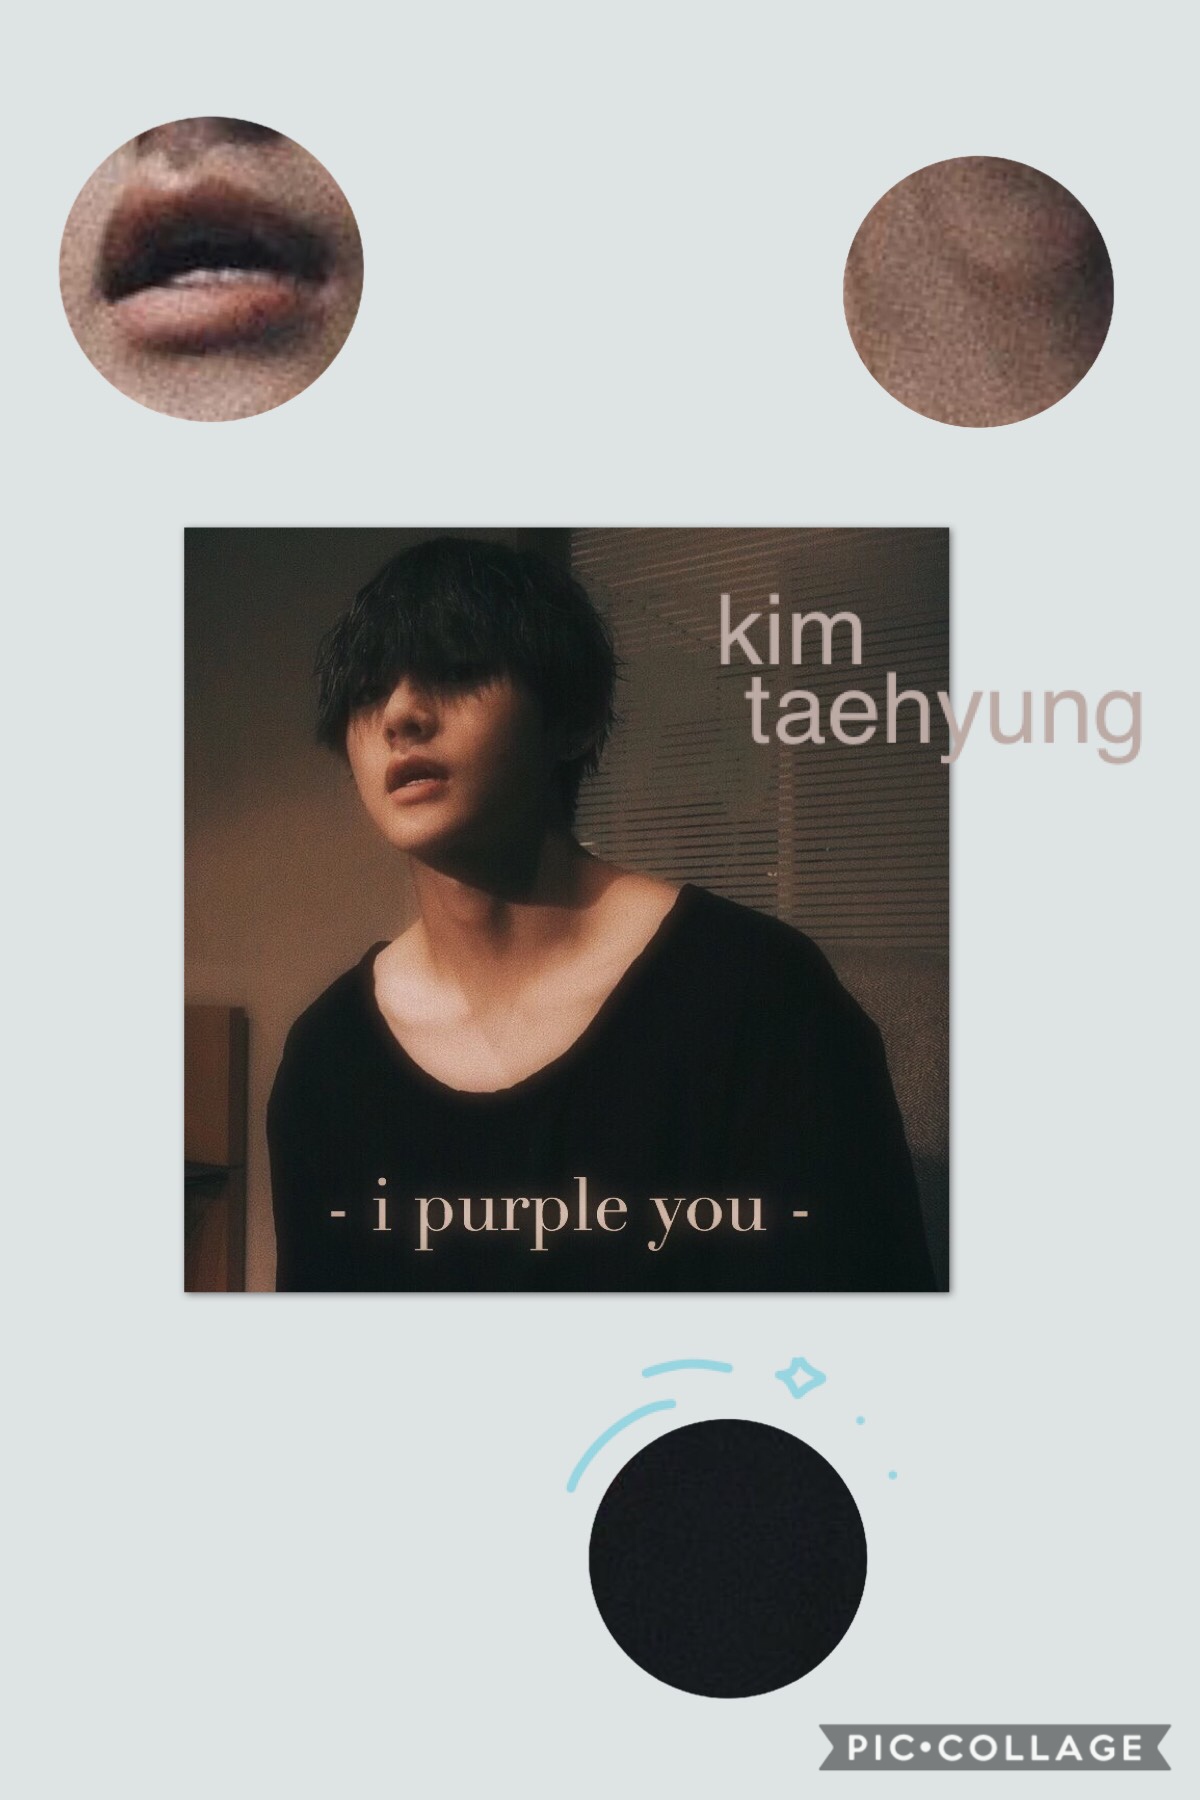 happy birthday kim taehyung¡❤️ i honestly can’t believe this is my first time making an edit for u when ur my bias (lol). anyways i love u with my whole ❤️!! hbd!